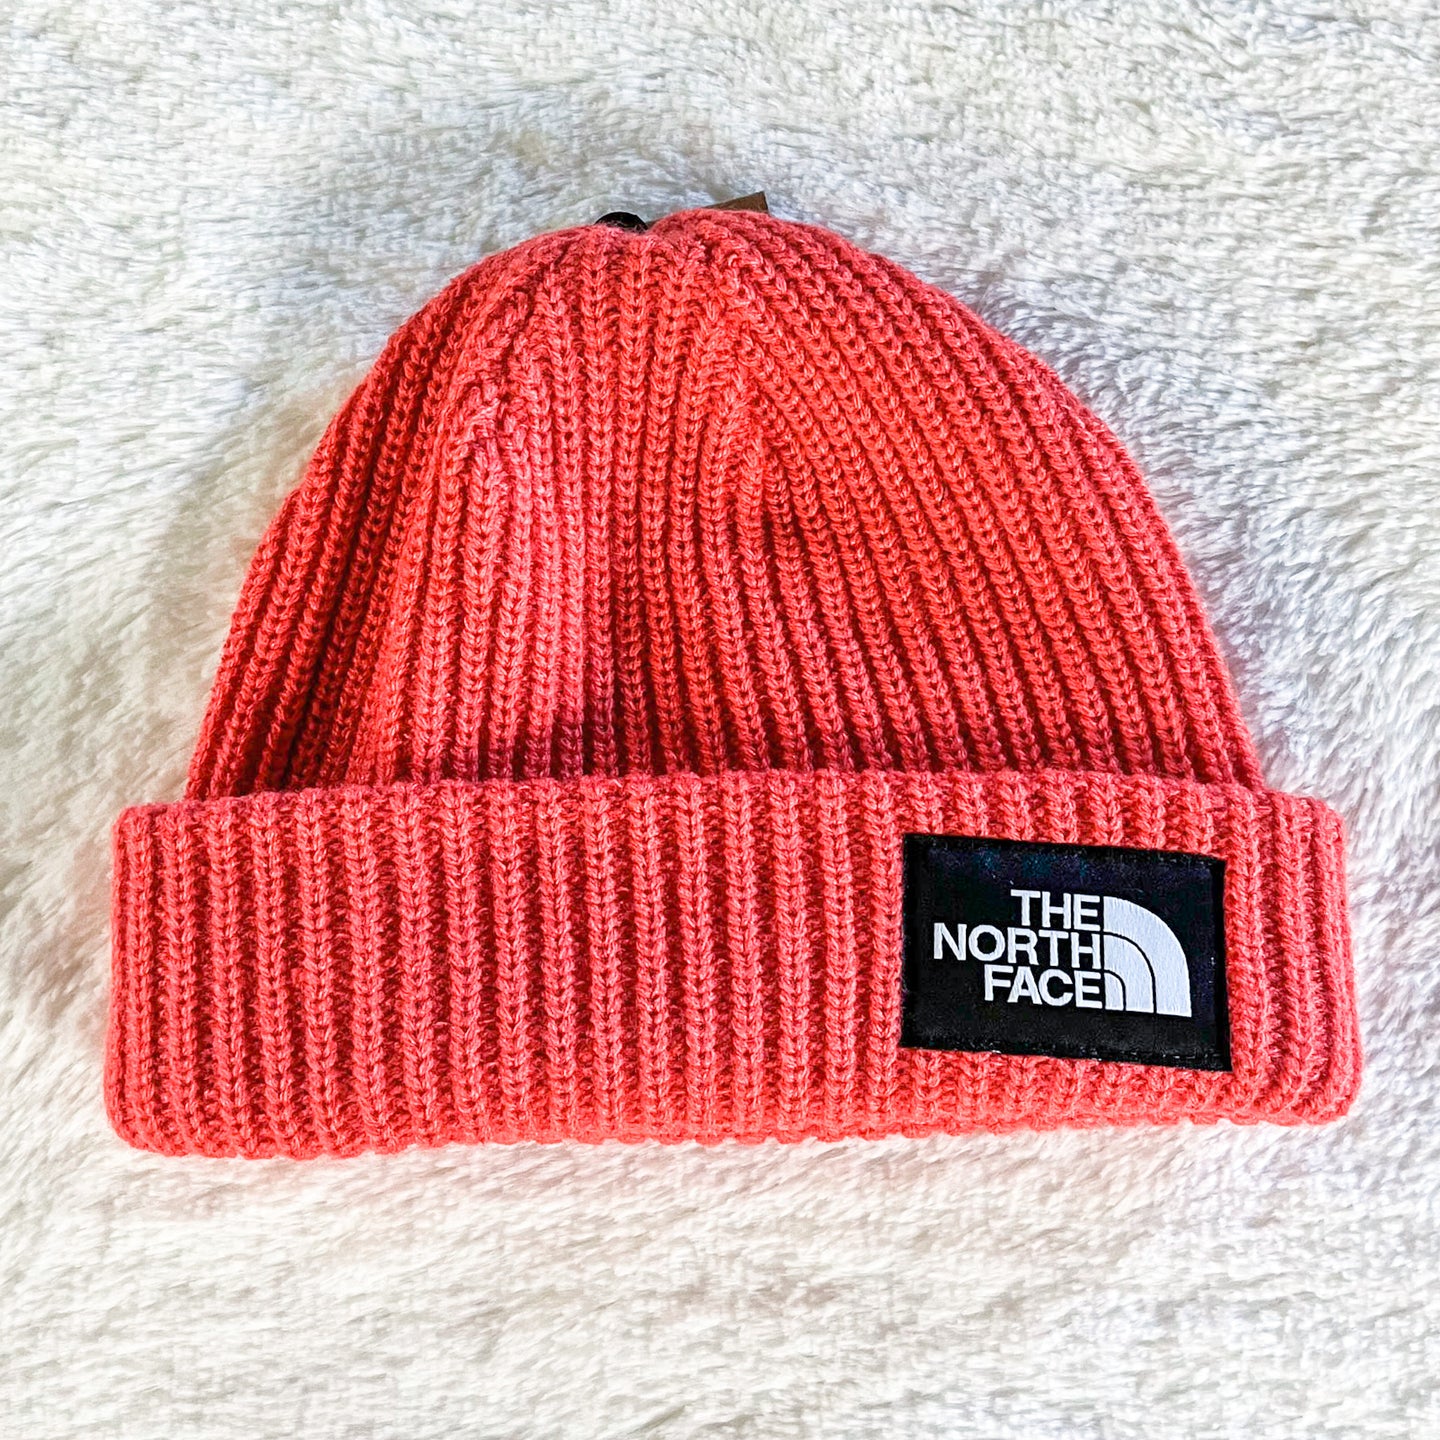 The North Face Kids’ Salty Dog Beanie Horizon Red